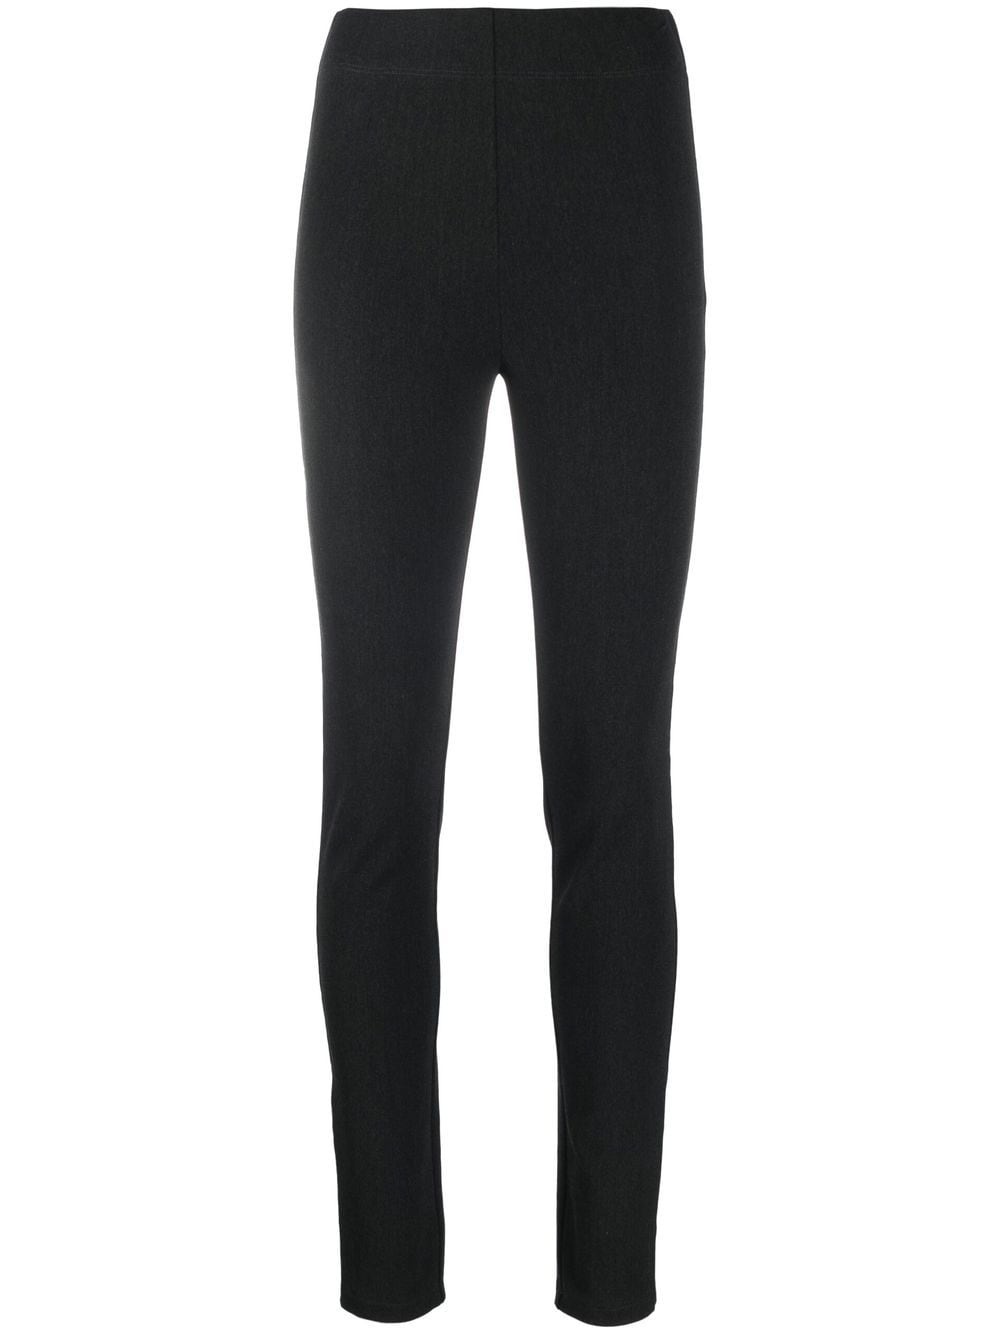 high-rise fitted leggings - 2